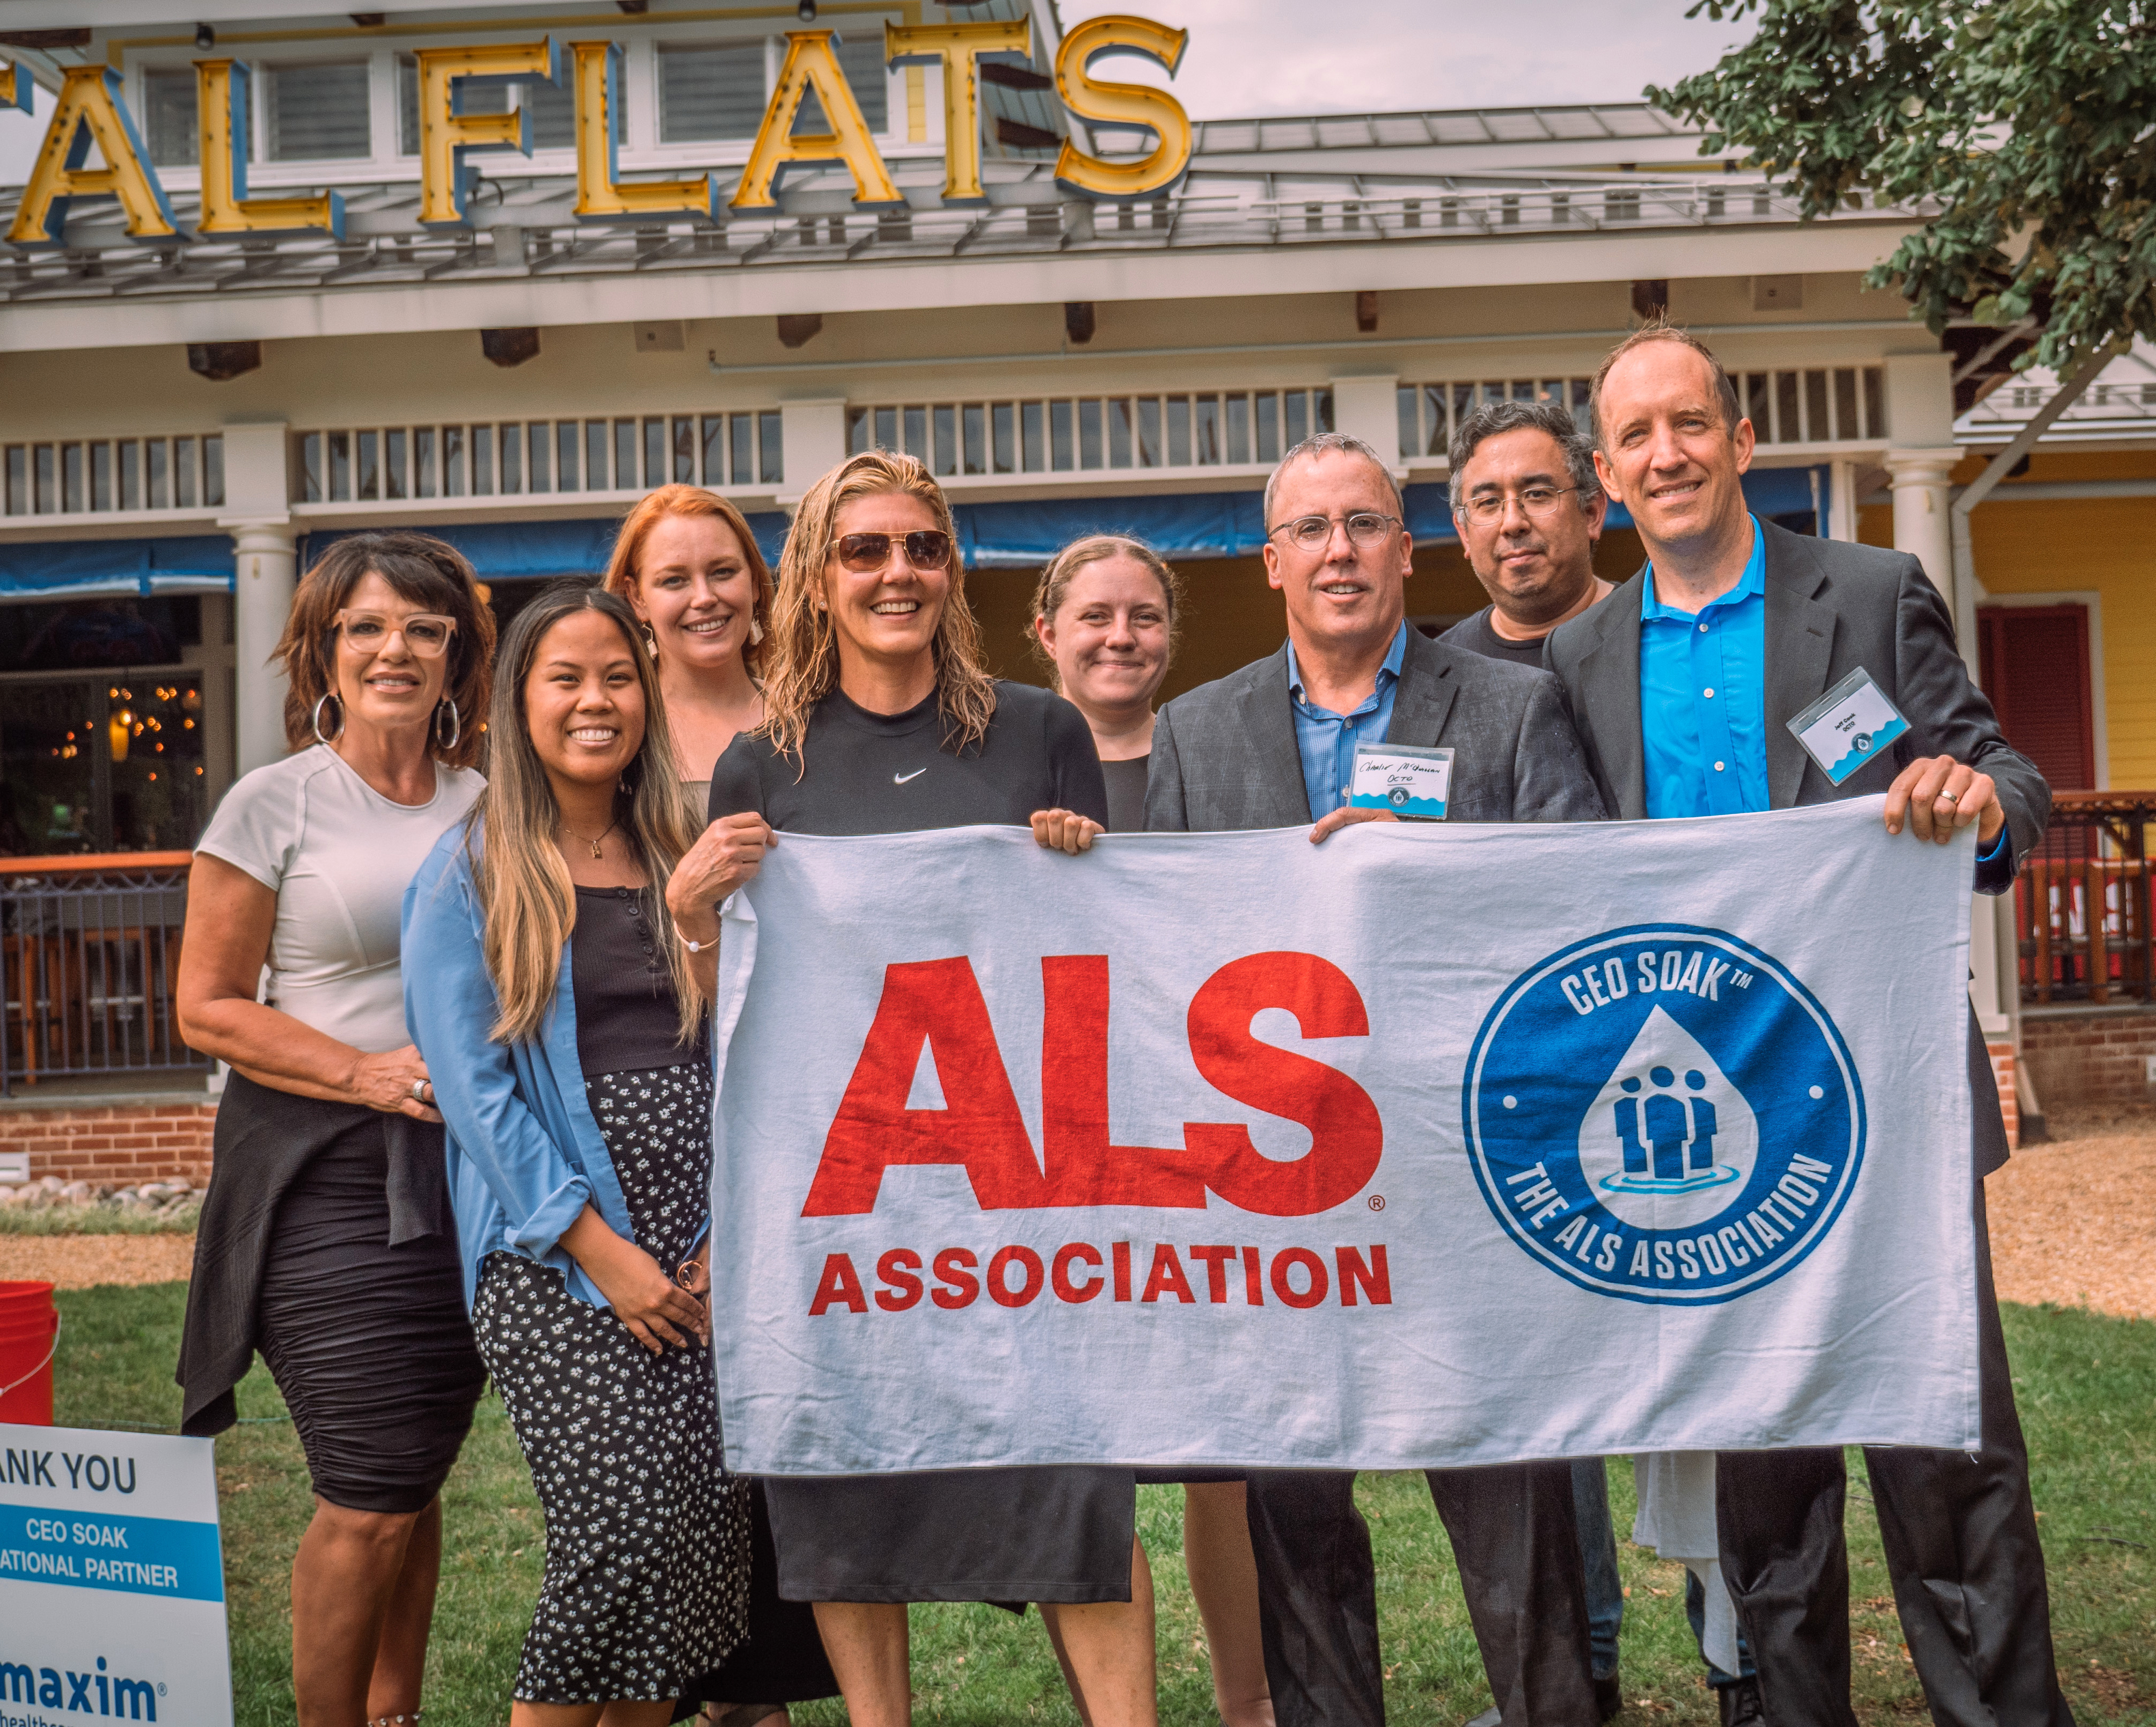 Oct. 24, 2023: Octo is one of the Baltimore Sun's Top Workplaces for 2023. Octo is a technology firm and leadership at the company took the ice bucket challenge in August to support the ALS Association in its fight against the disease. (Courtesy of Octo)